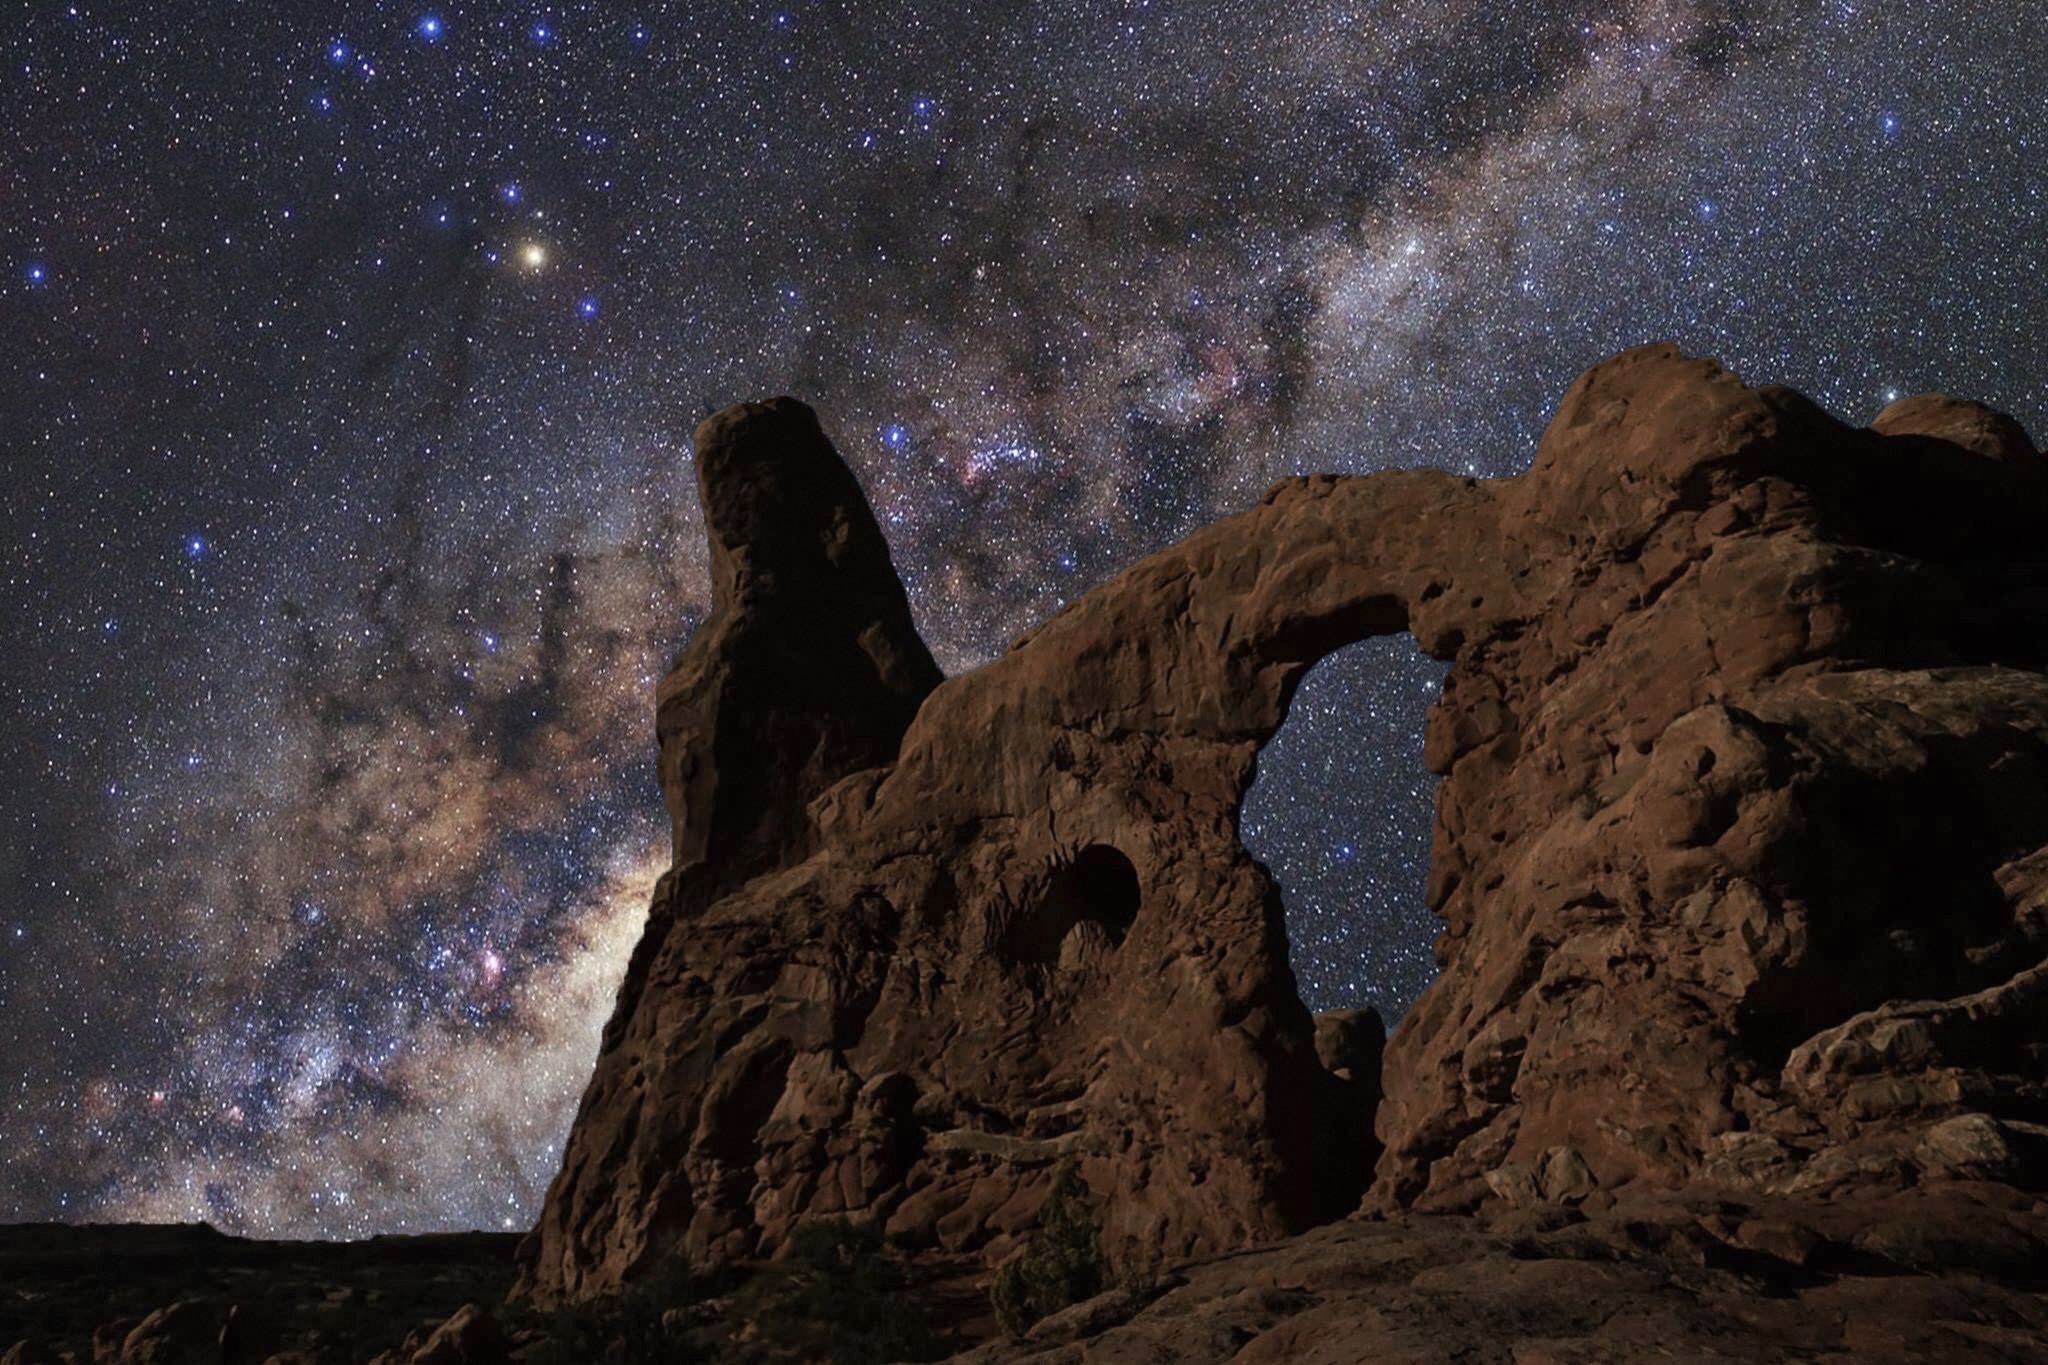 Arches Under the stars...